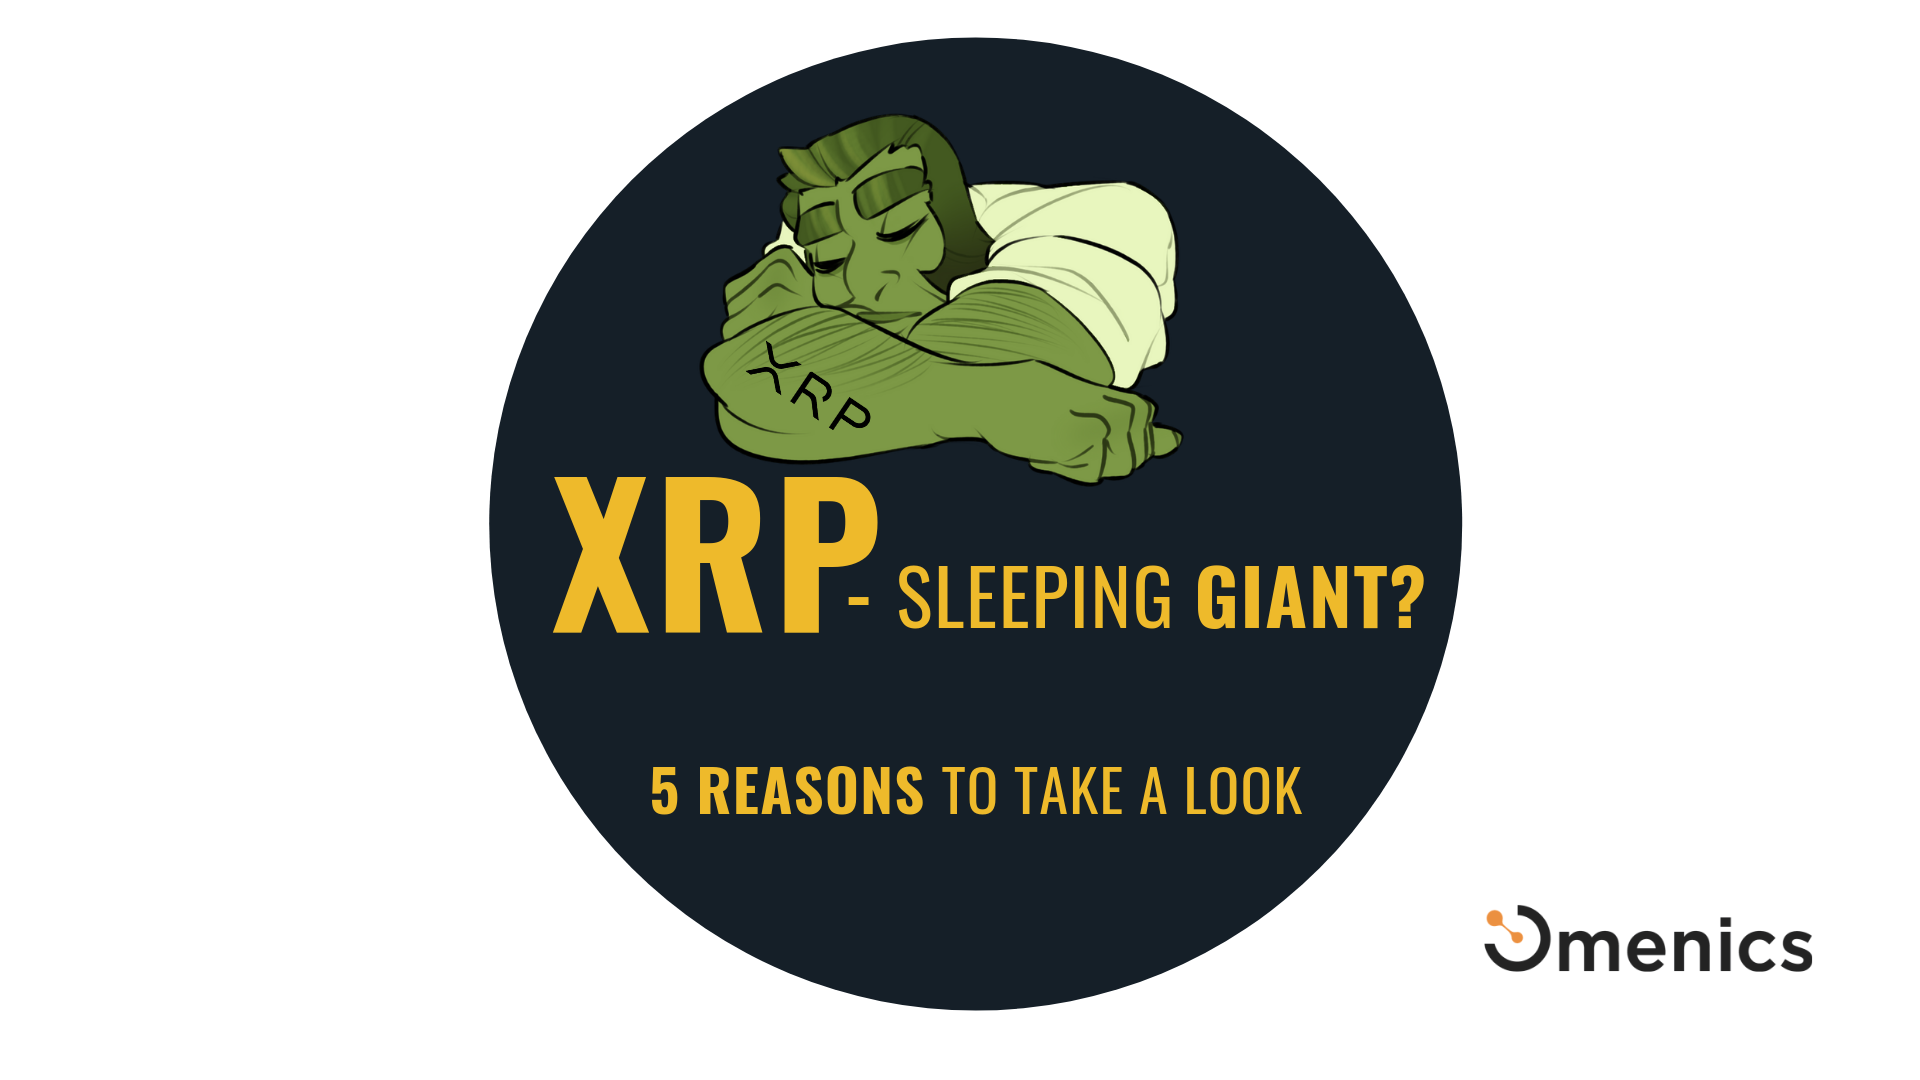 XRP: The New Stable Coin Or A Sleeping Giant?